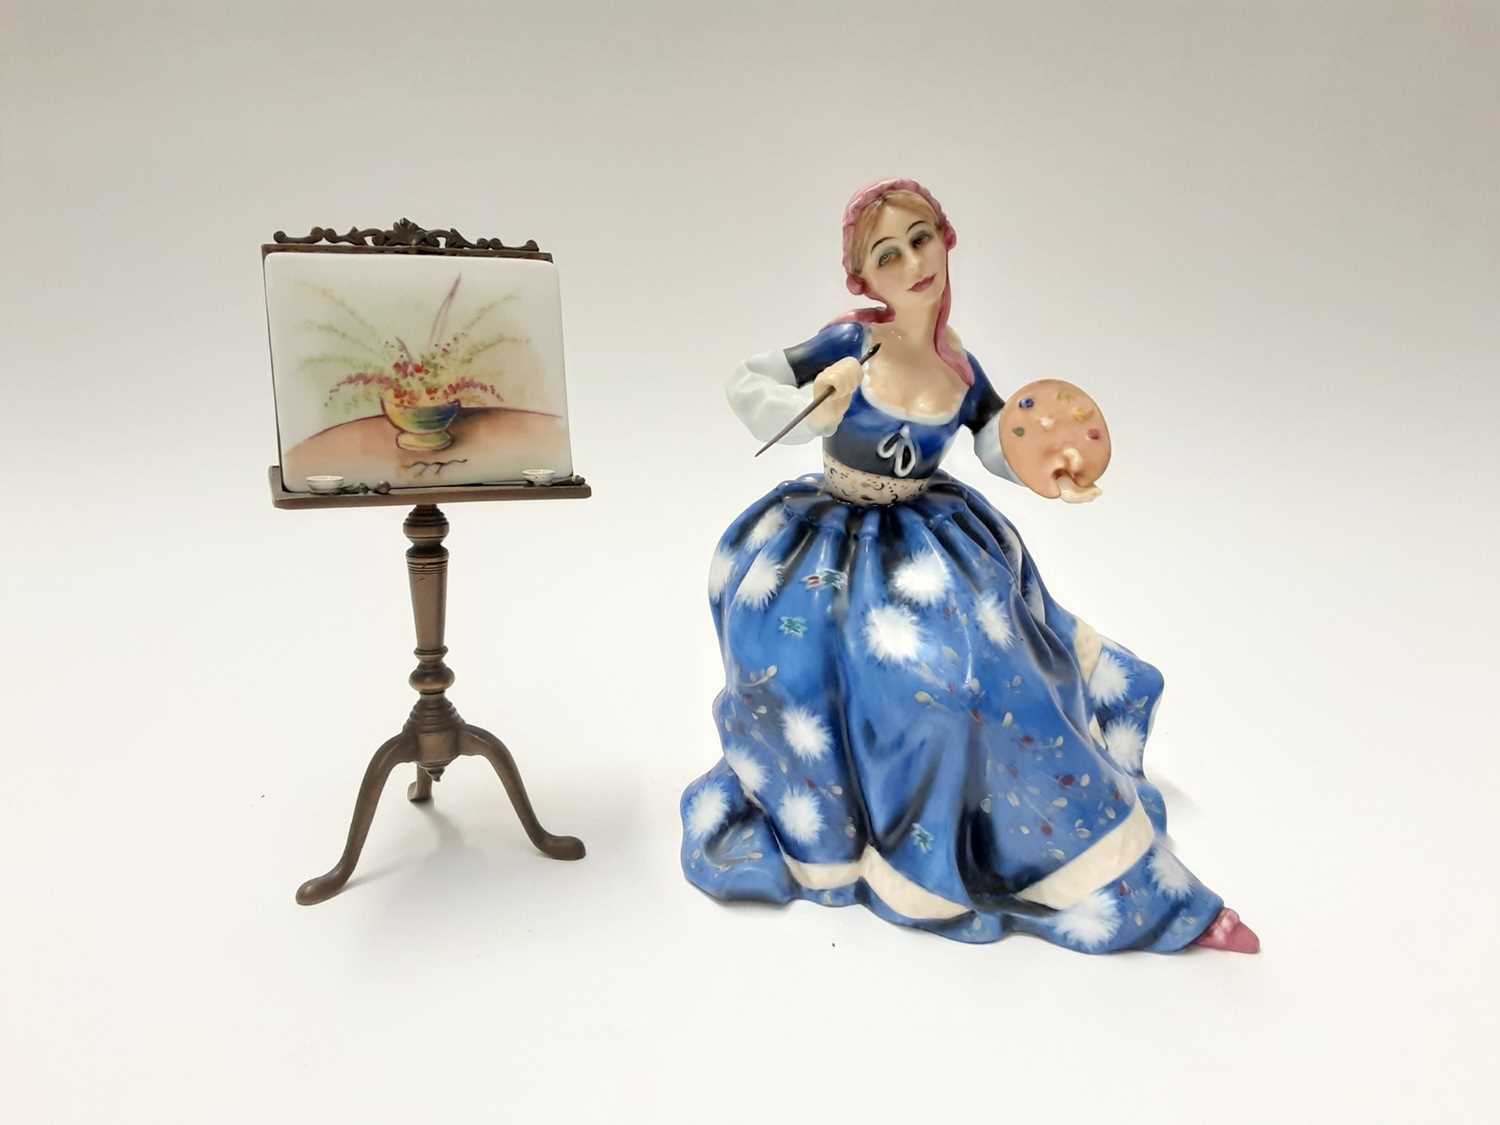 Lot 133 - Royal Doulton limited edition Gentle Arts figure - Painting HN3012 on plinth base, modelled by Pauline Parsons, number 429 of 750, boxed with certificate